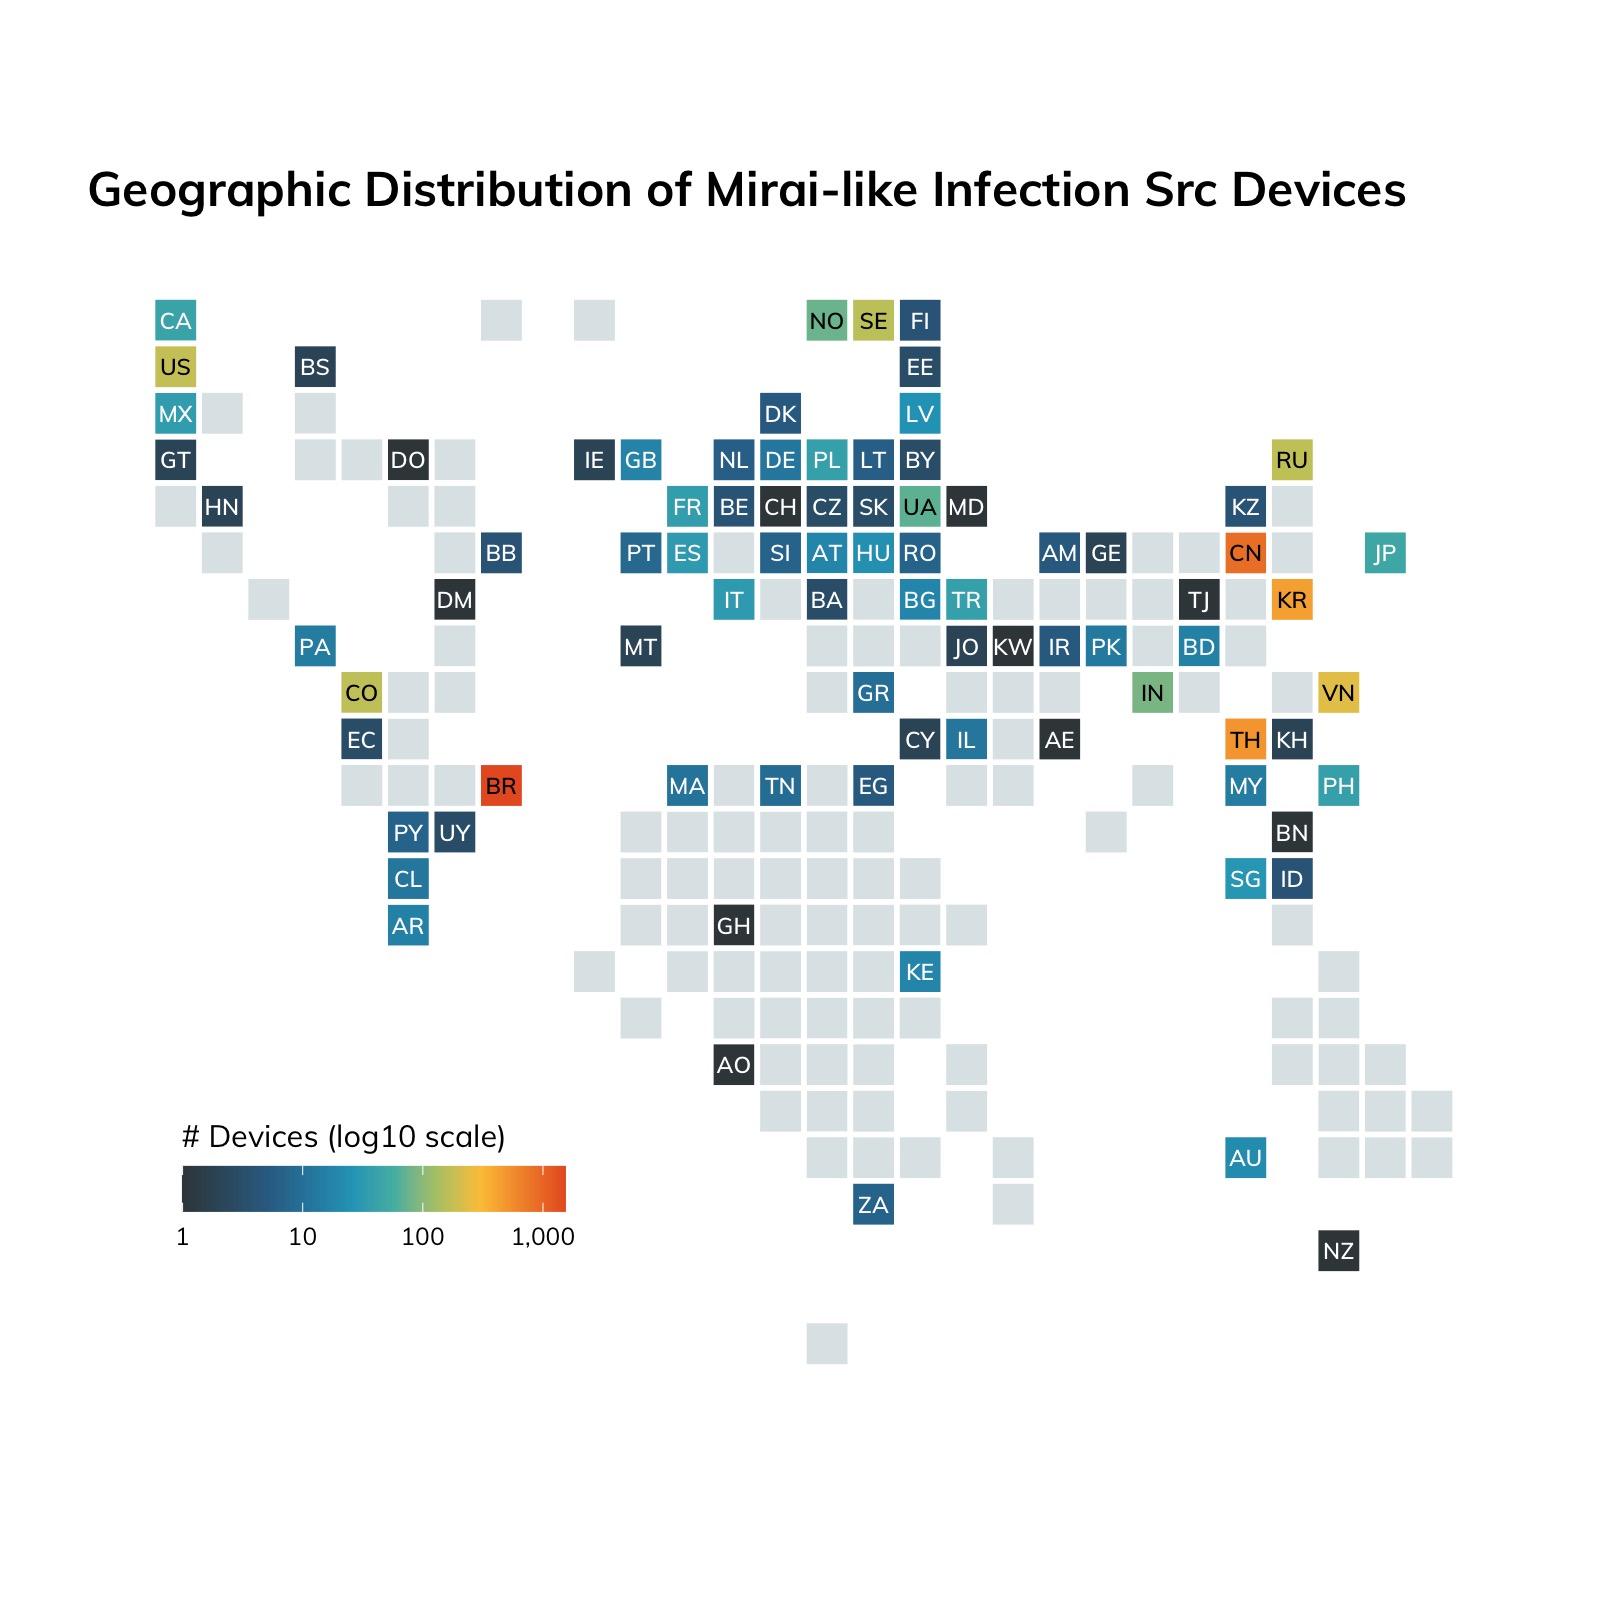 Figure 4: Geographic Distribution of Mirai-like Infection Source Devices